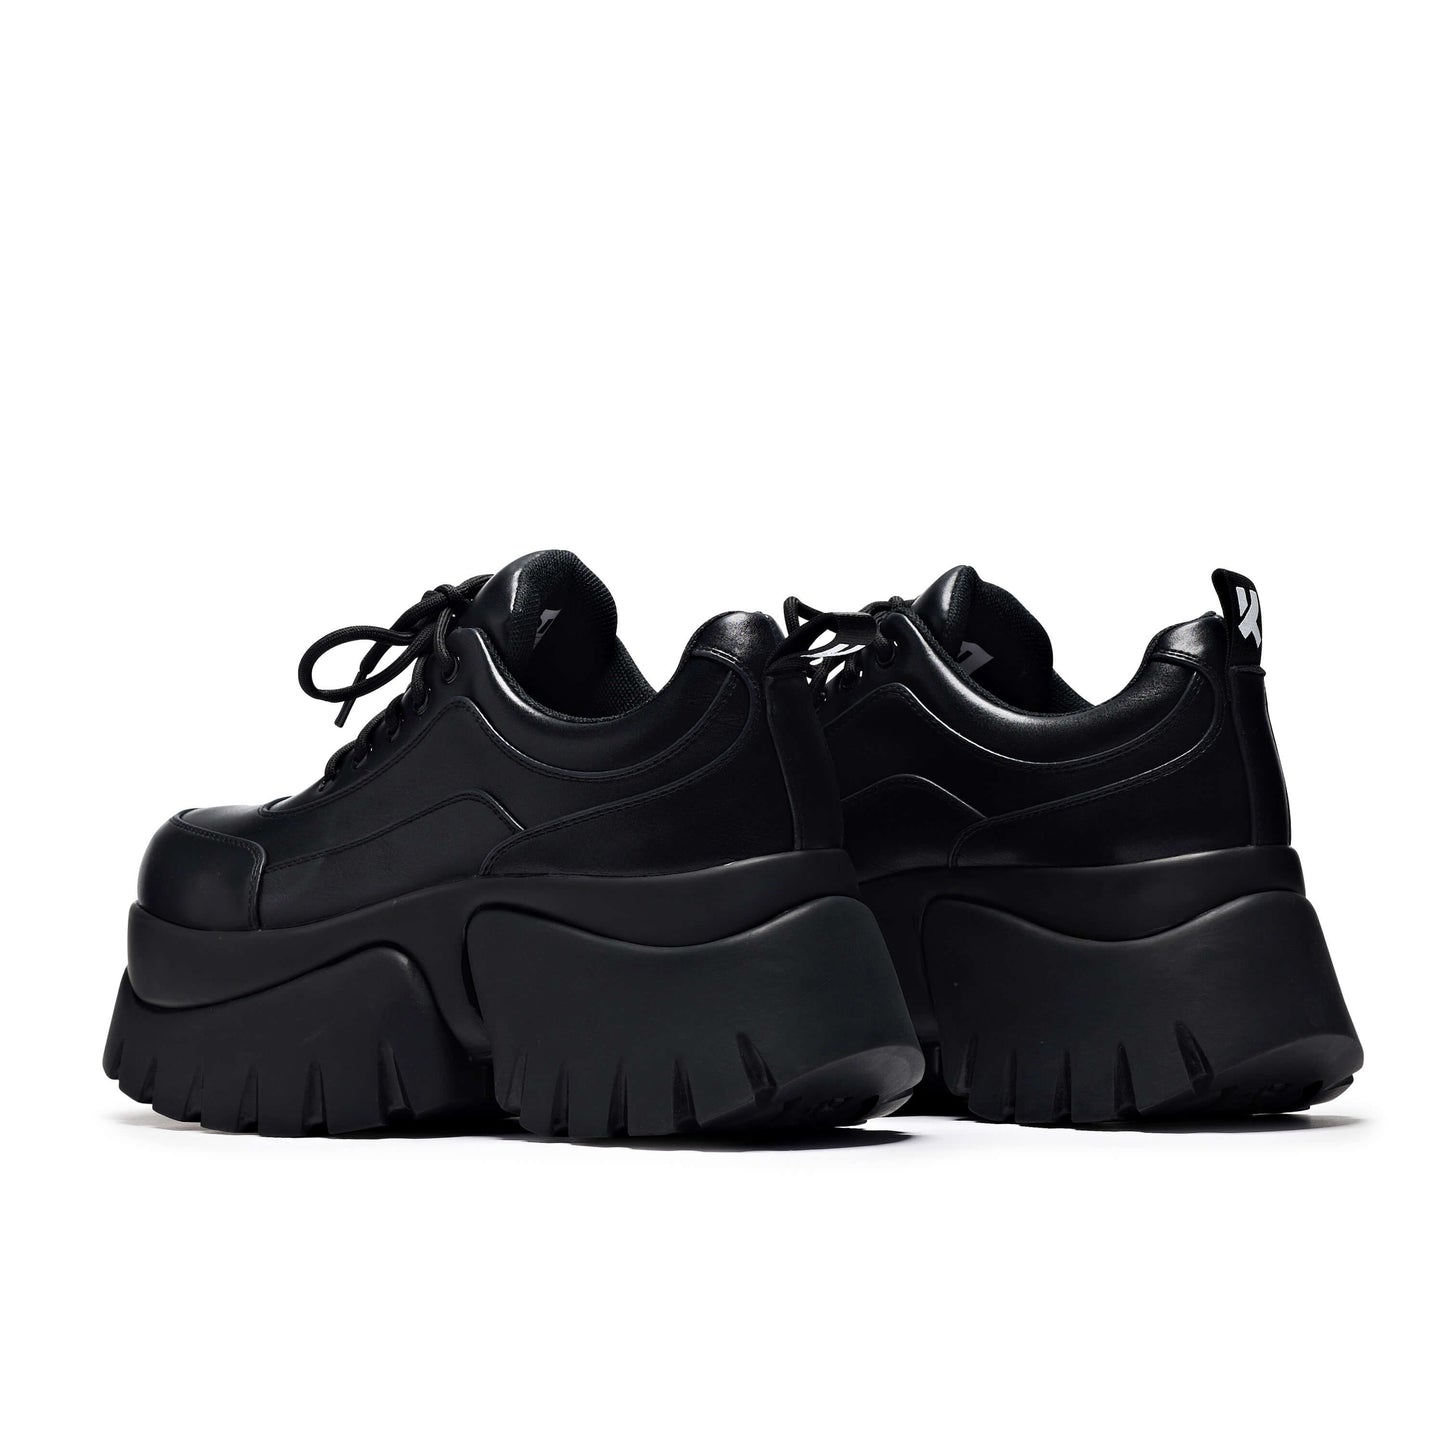 Chronicles Vilun Platform Trainers - Trainers - KOI Footwear - Black - Back View